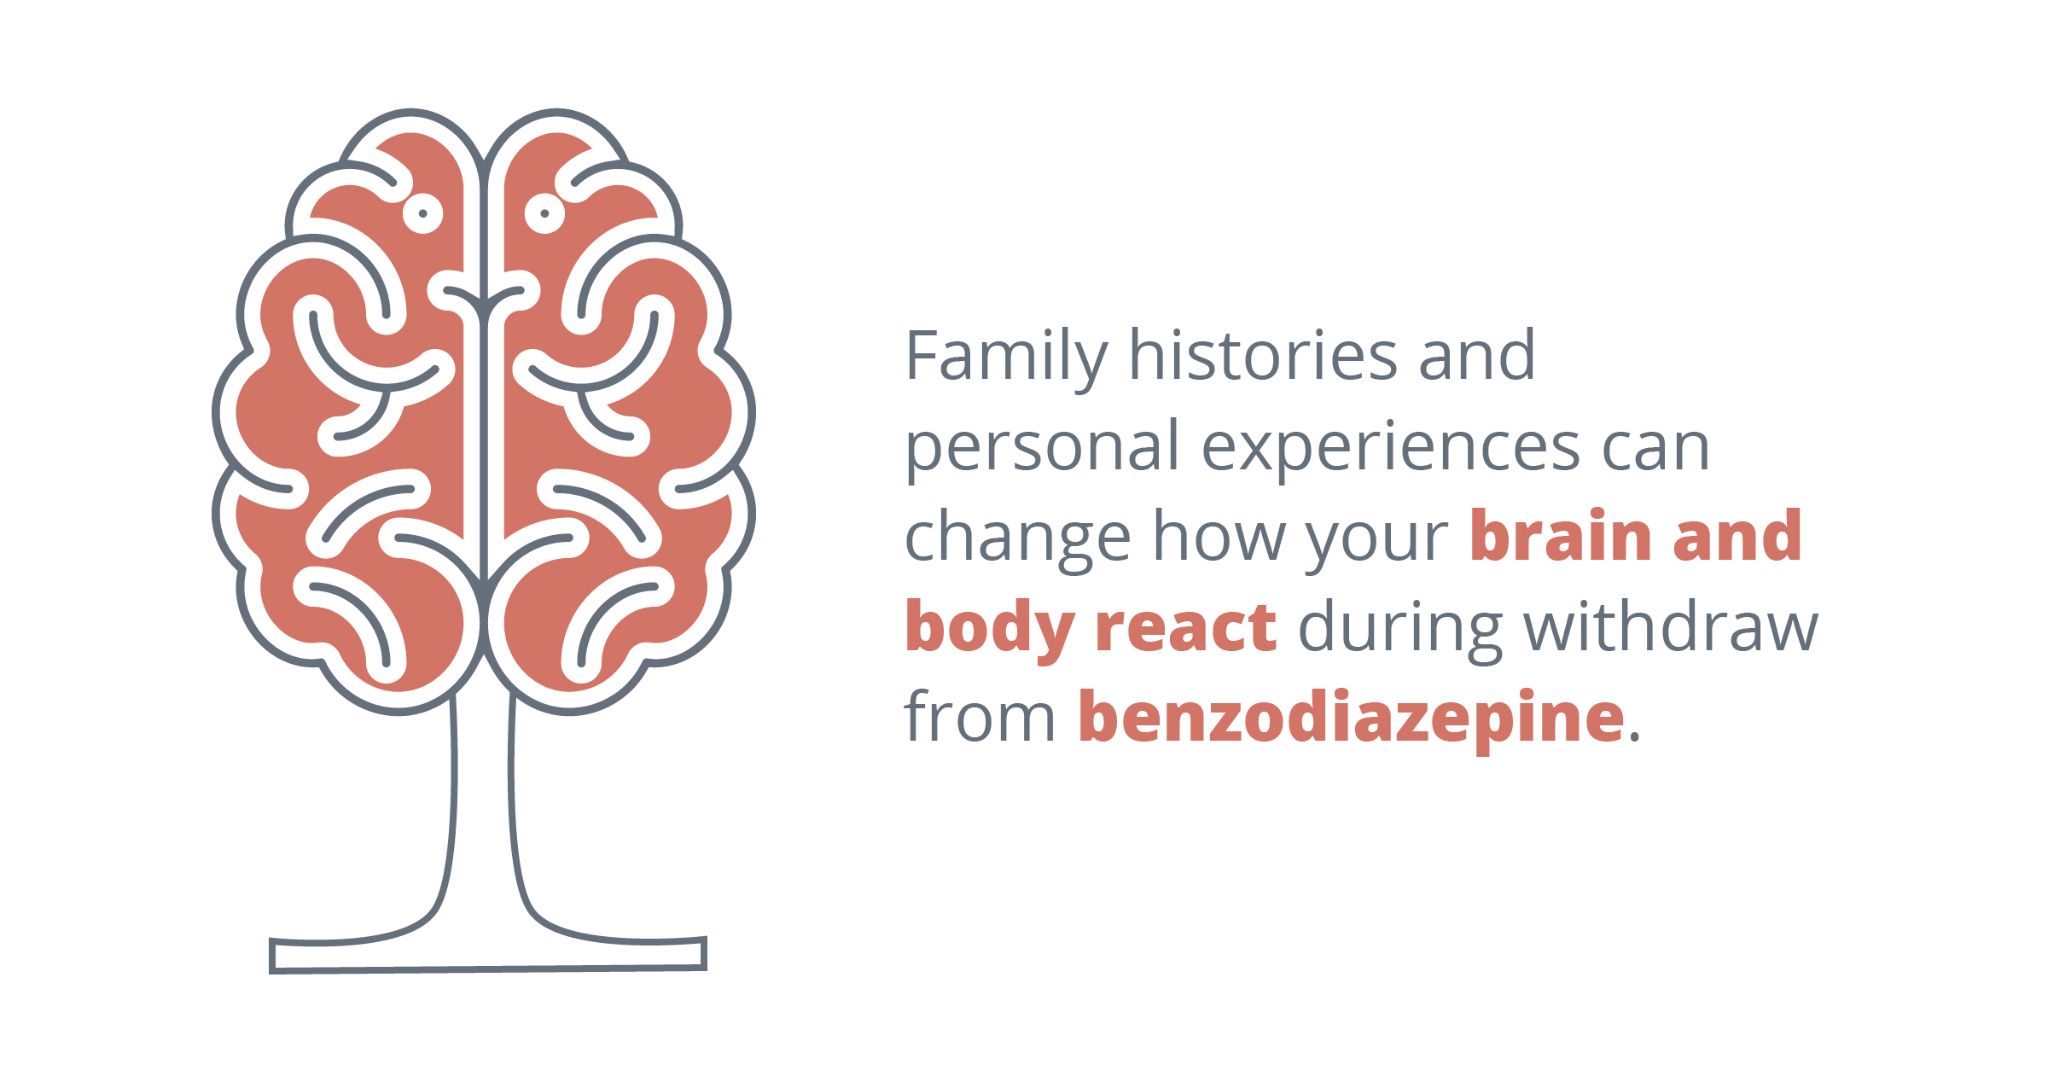 Family histories and personal experiences can change how your brain and body react during withdrawal from benzodiazepine. 